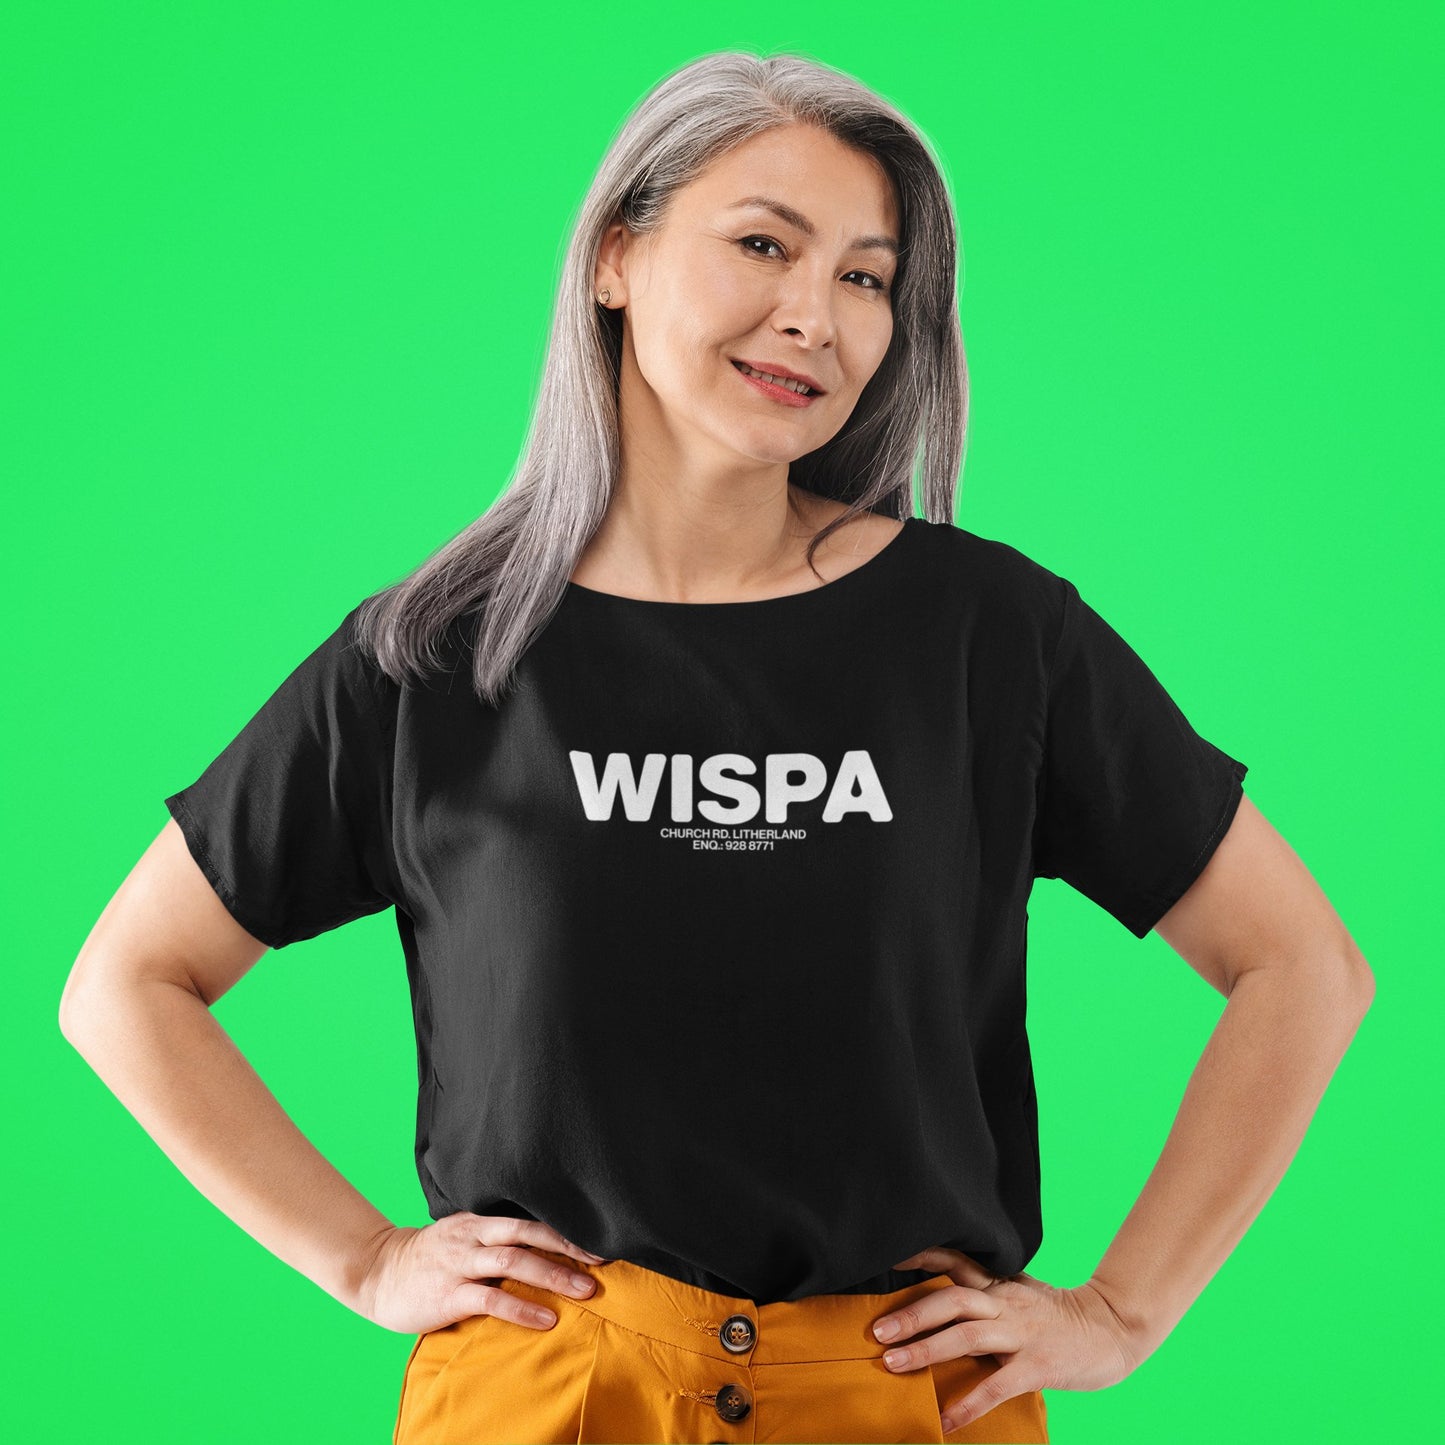 Wispa unisex T-shirt - various colours - Dirty Stop Outs